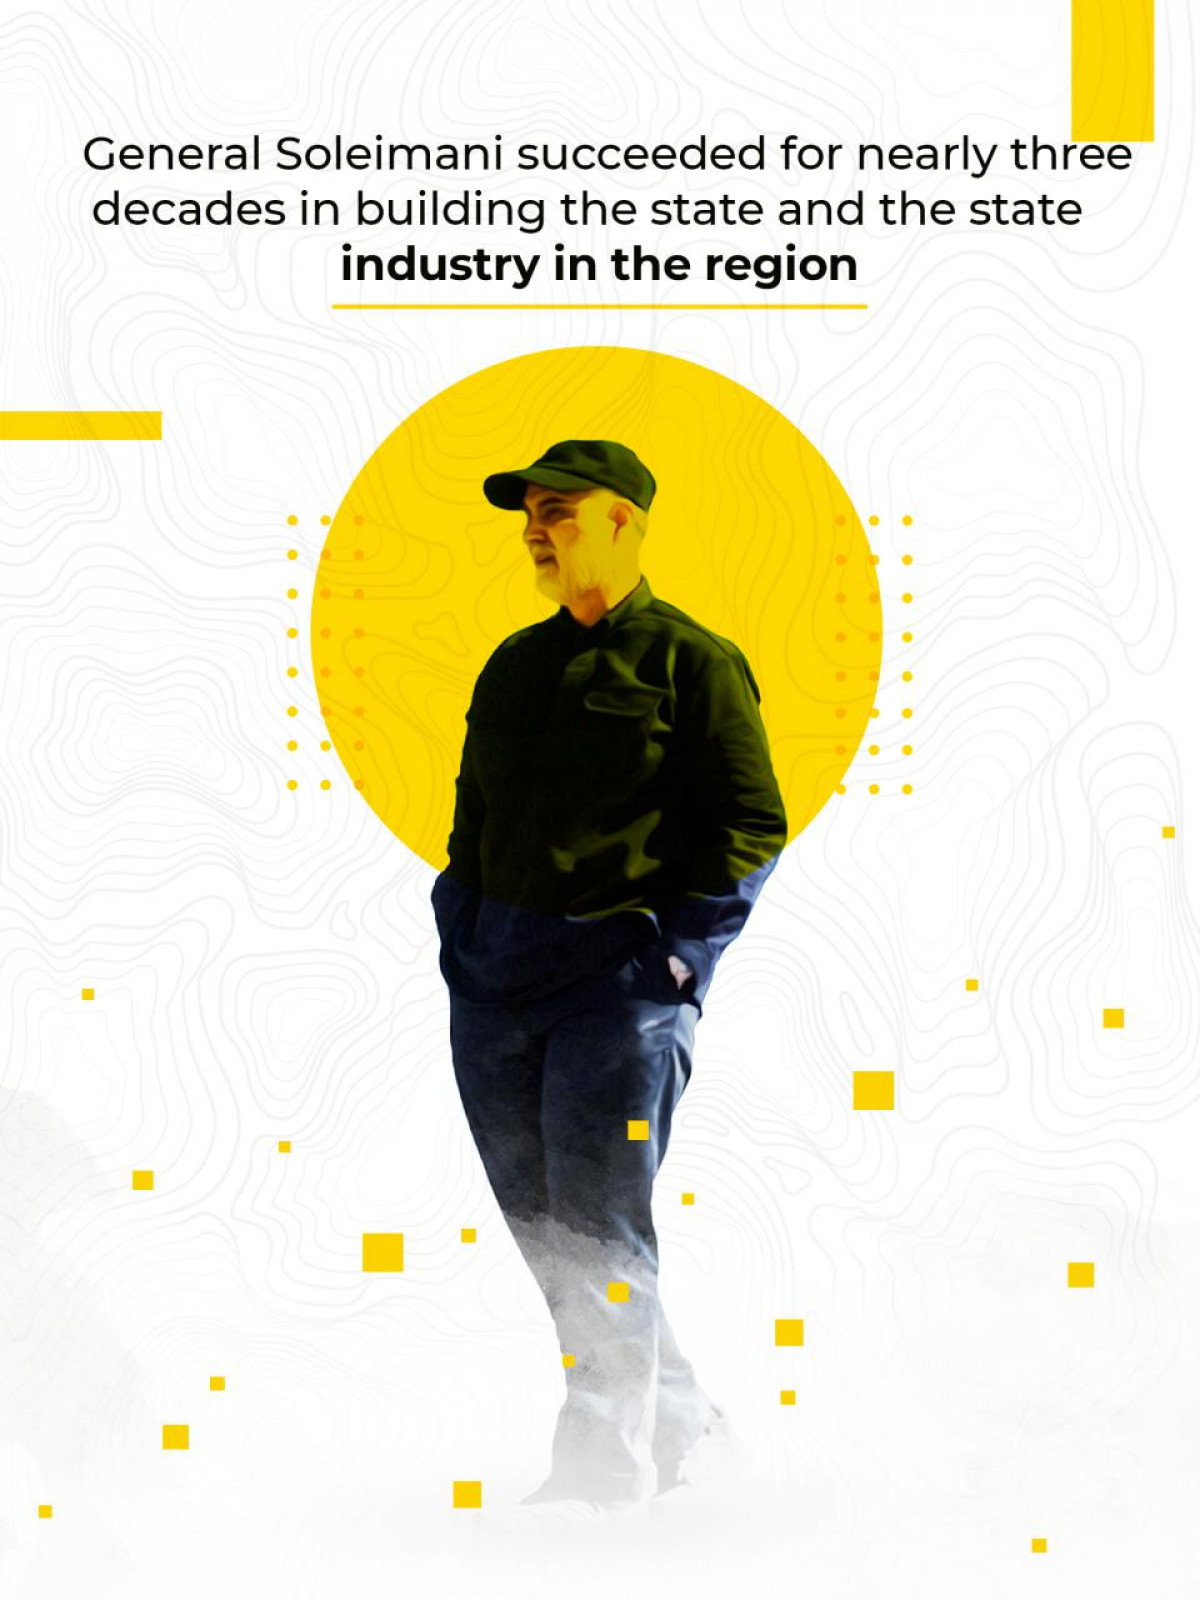 General Soleimani succeeded for nearly three decades in building the state and the state industry in the region